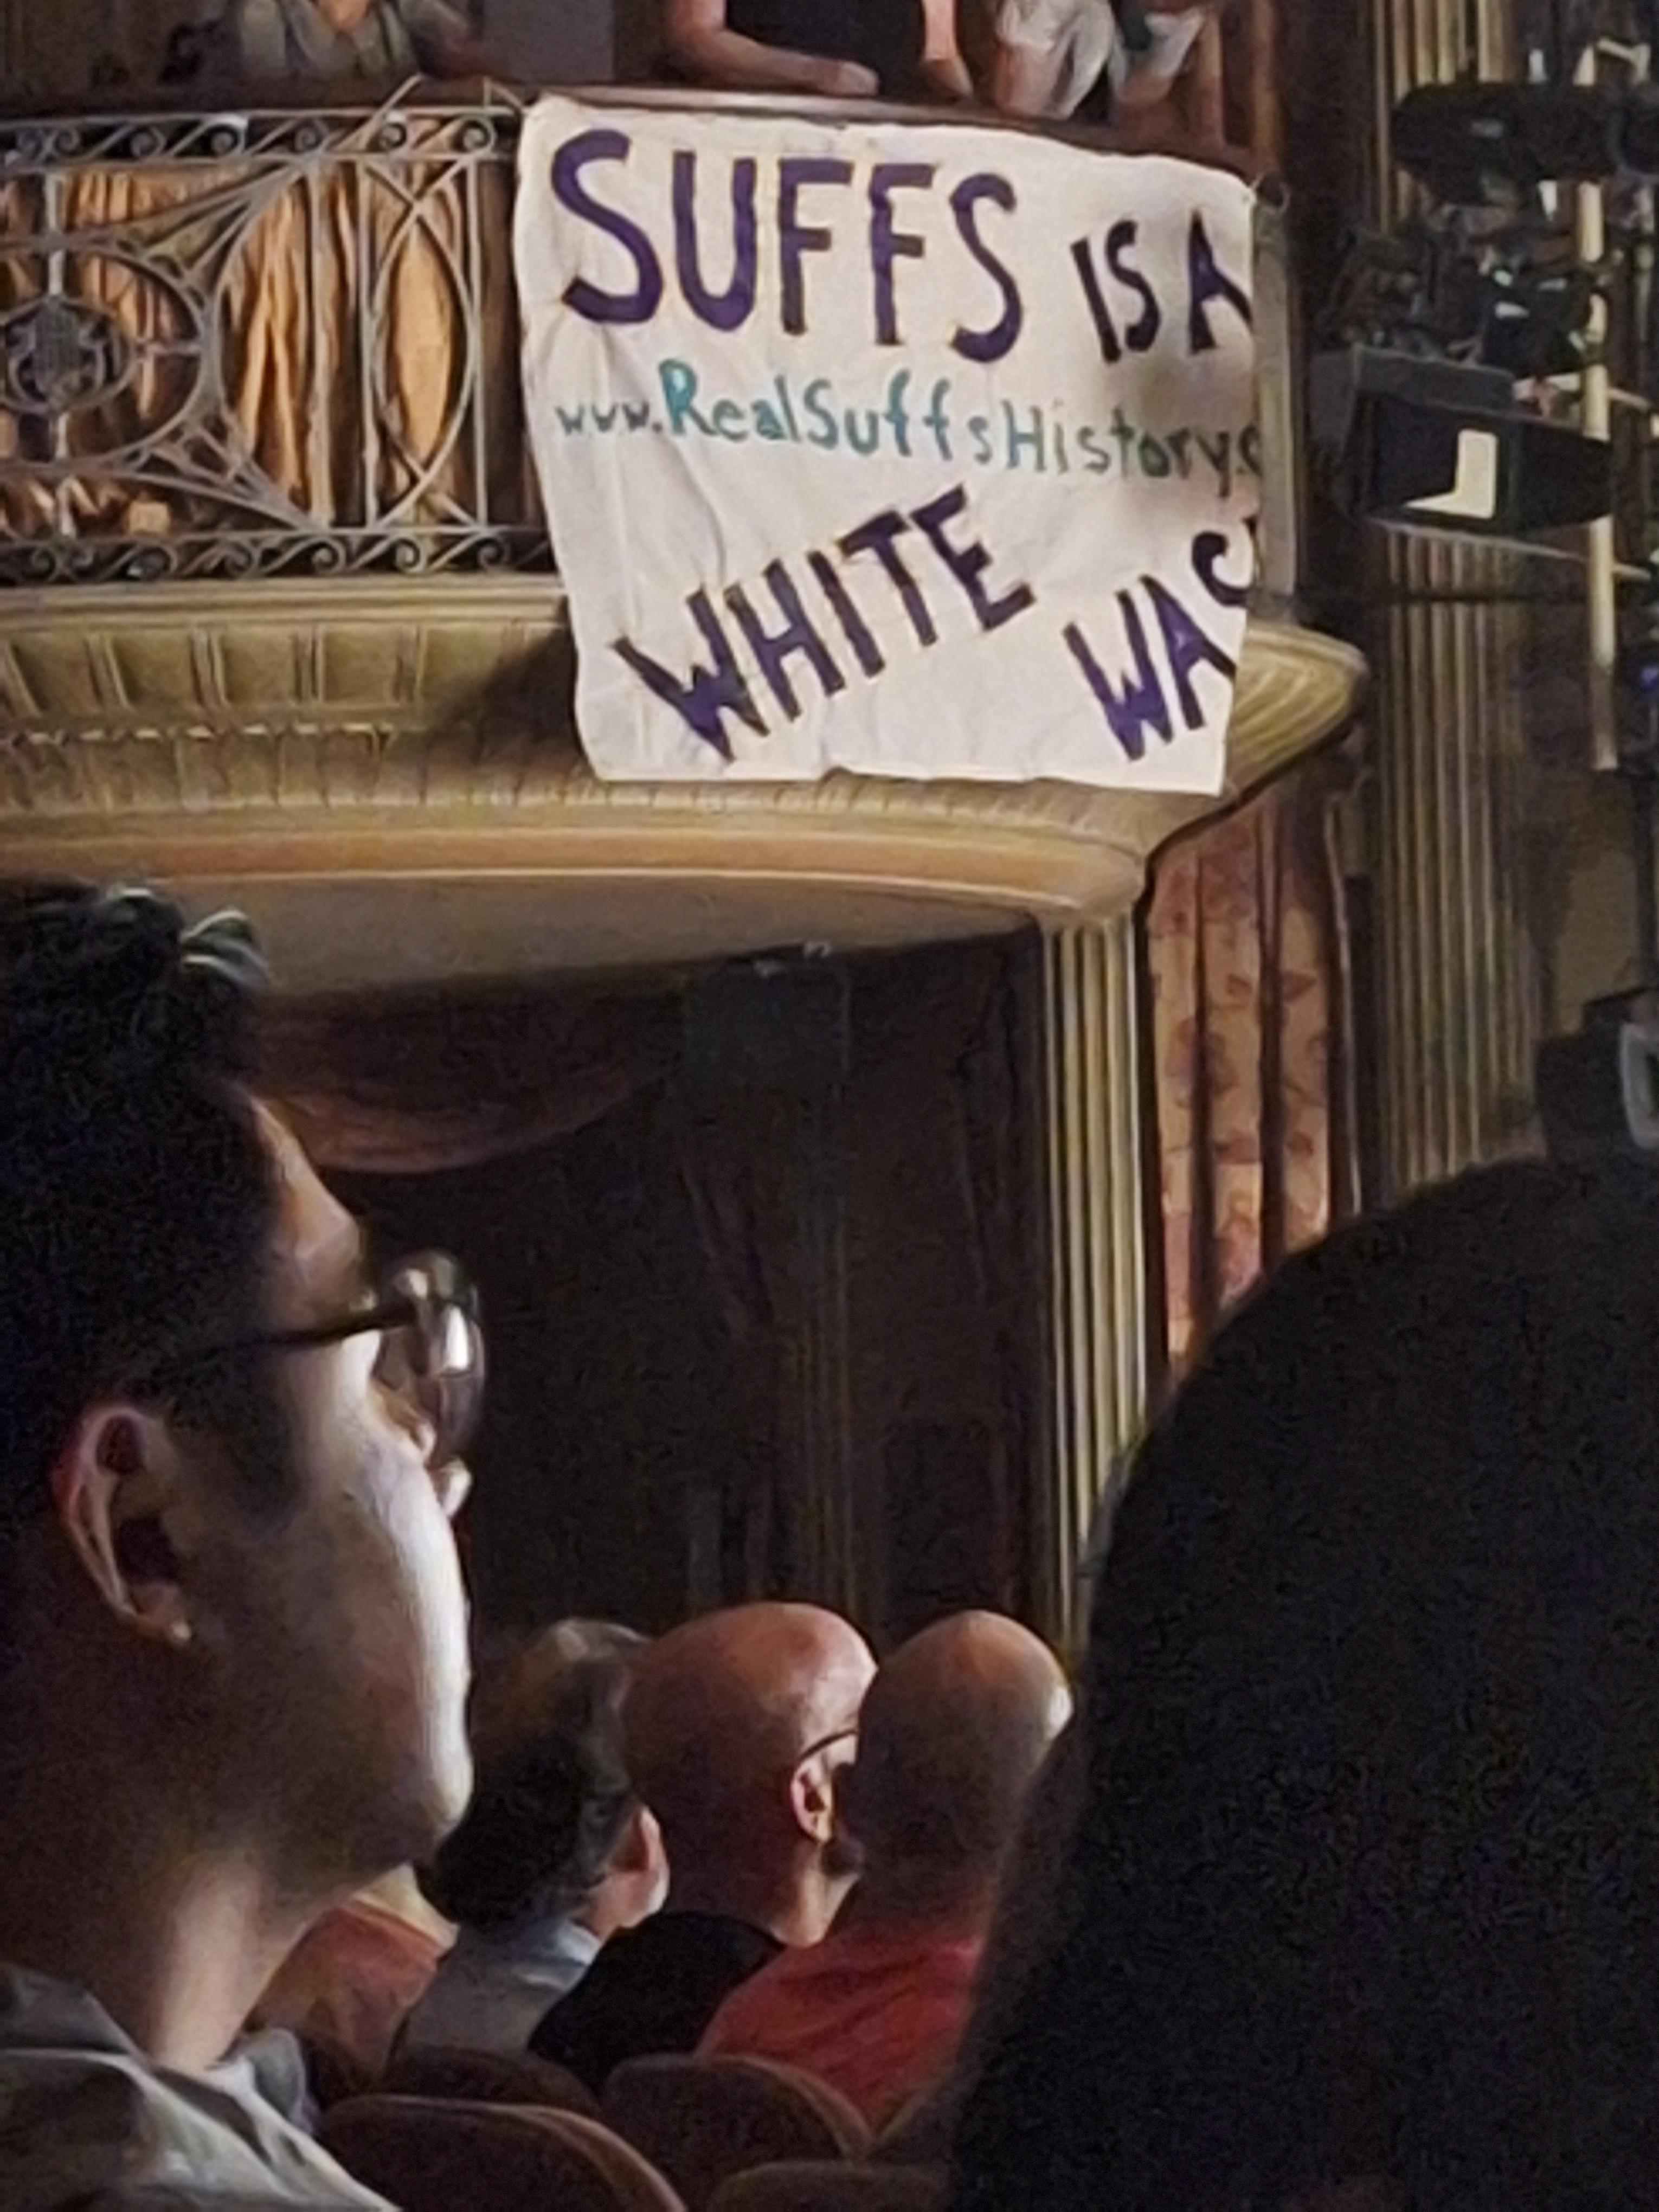 A banner with the message "SUFFS is a white wash" and the website "www.RealSuffsHistories.com" is hung from a balcony in a theater.